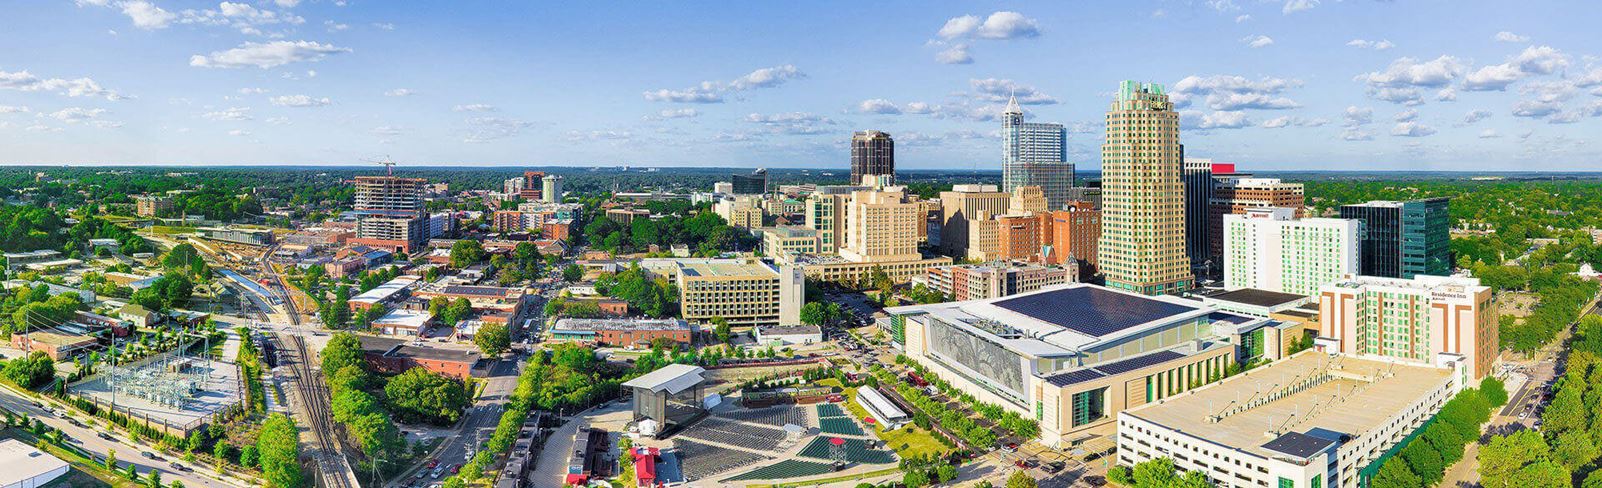 Aerial view of Downtown Raleigh NC.